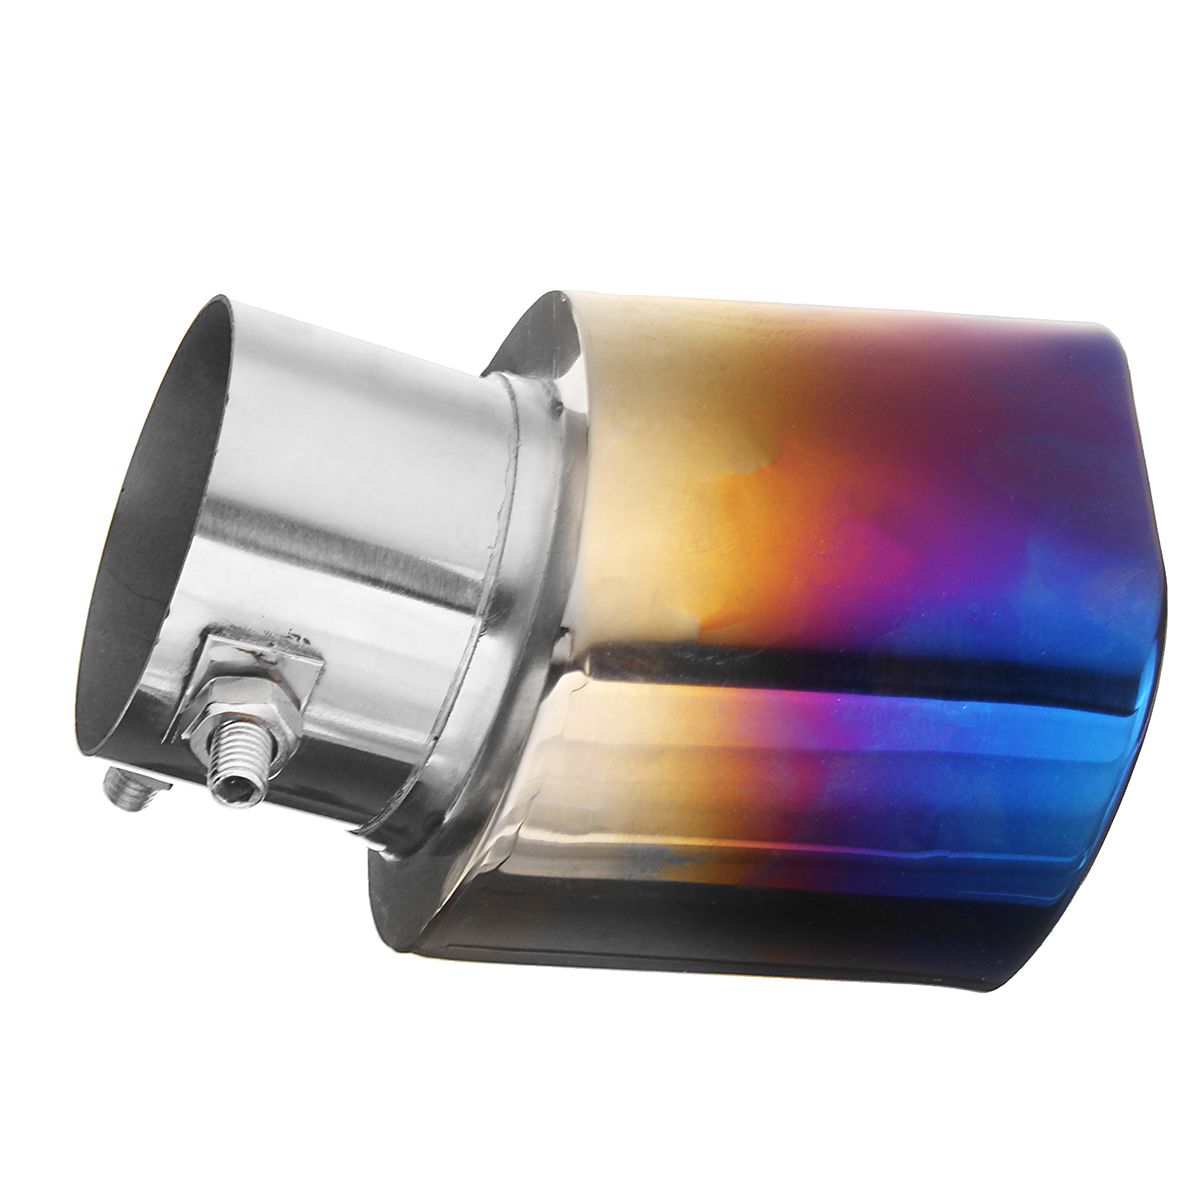 Car-Universal-Grilled-Blue-Stainless-Steel-Car-Muffler-Exhaust-Tailpipe-Square-1194905